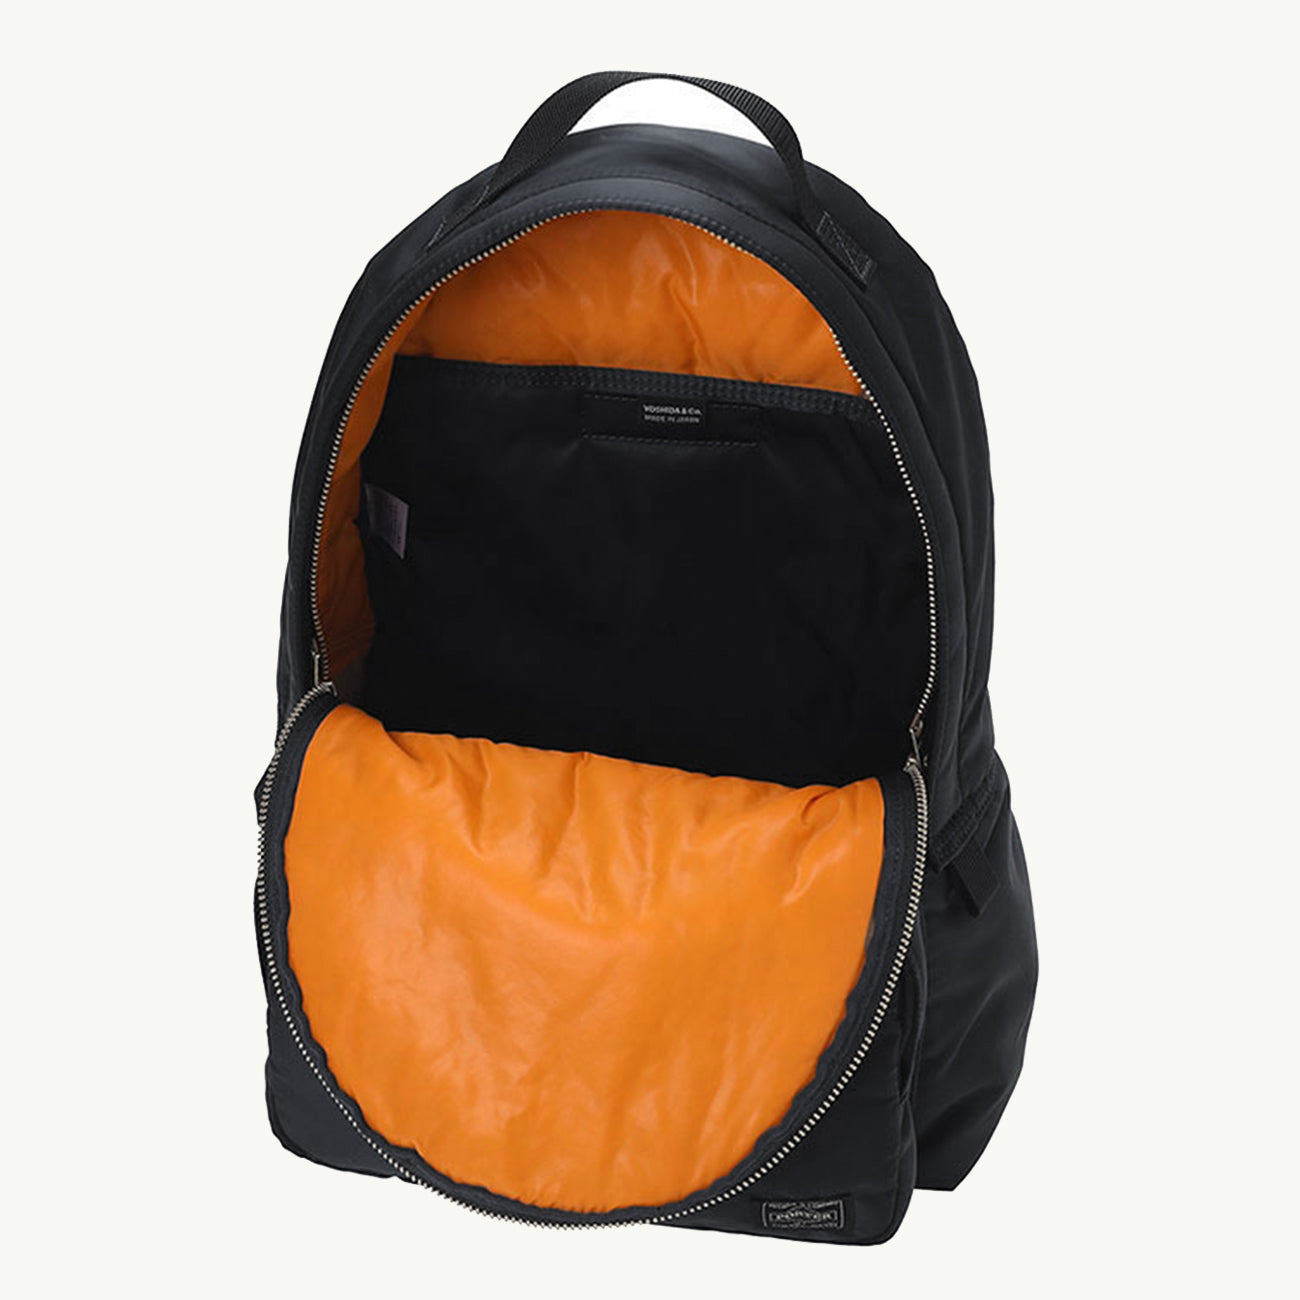 Tanker Day Pack Small - Black